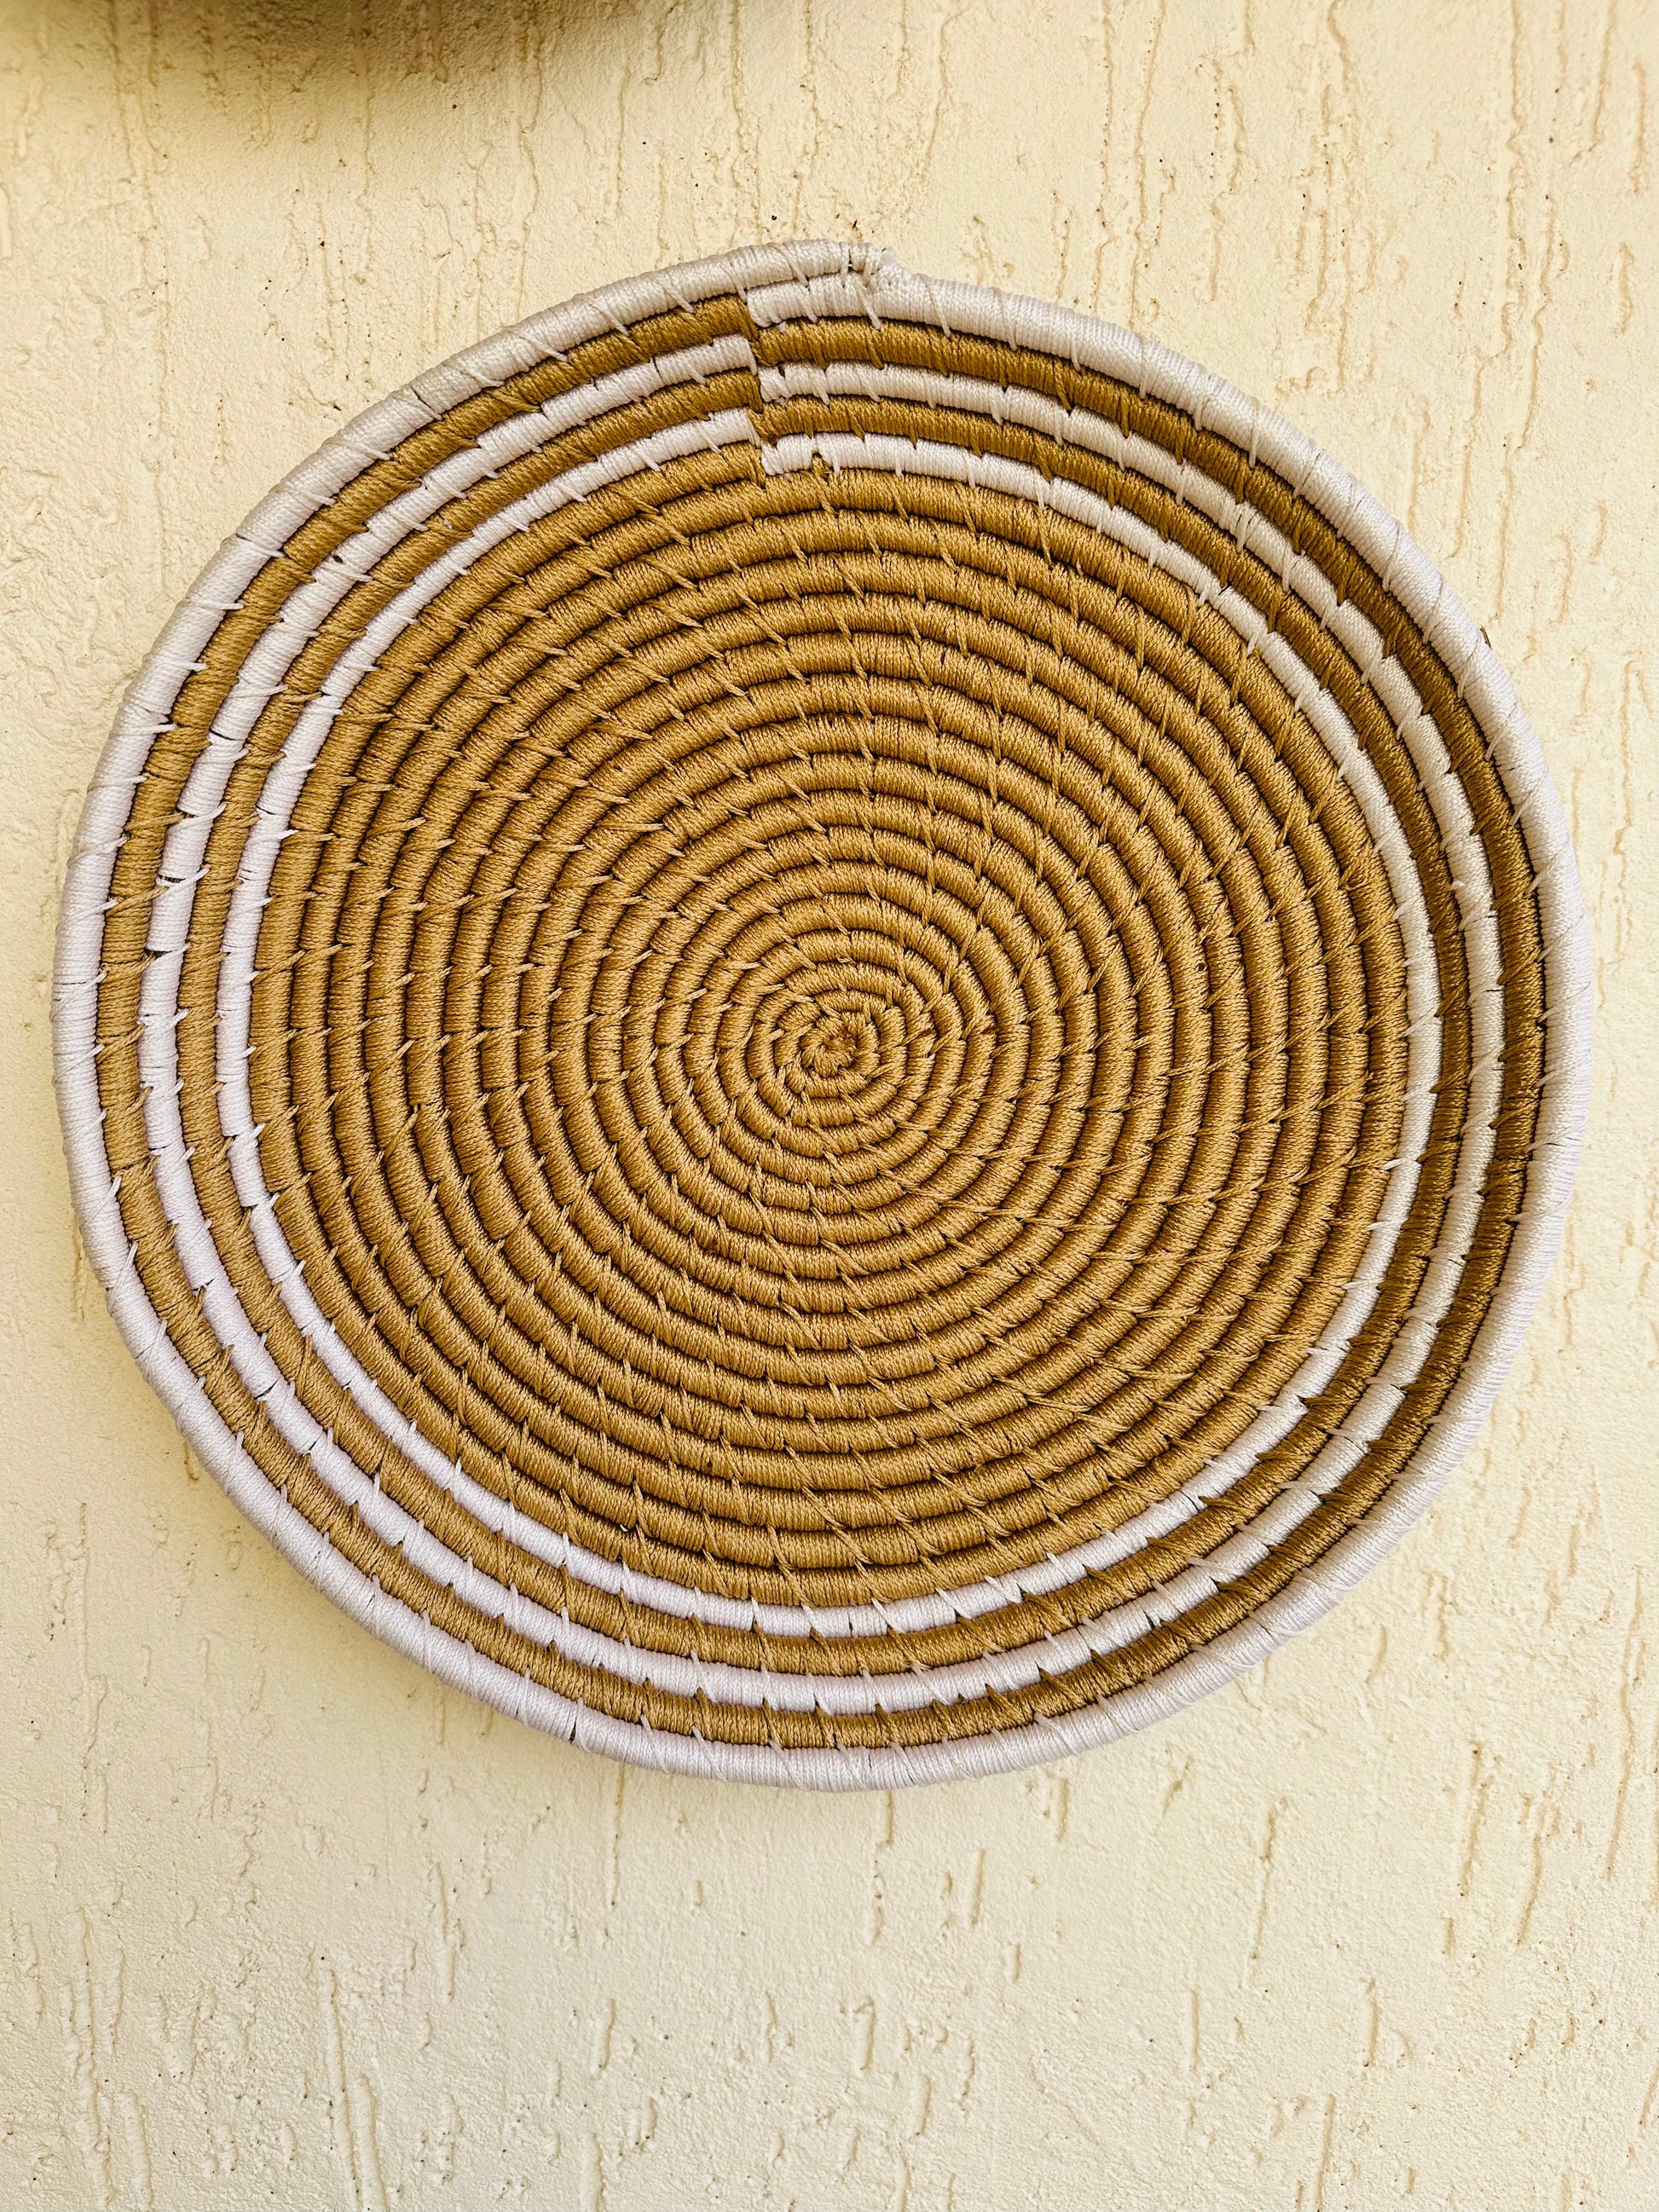 tesu Jute woven wall plates Handcrafted decor Abstract designs Eco-friendly materials Sustainable living Bohemian decor Modern chic Interior decor trends Artisan craftsmanship Versatile wall decor Organic charm Sustainable home decor Timeless pieces Artistry Sophistication tesu